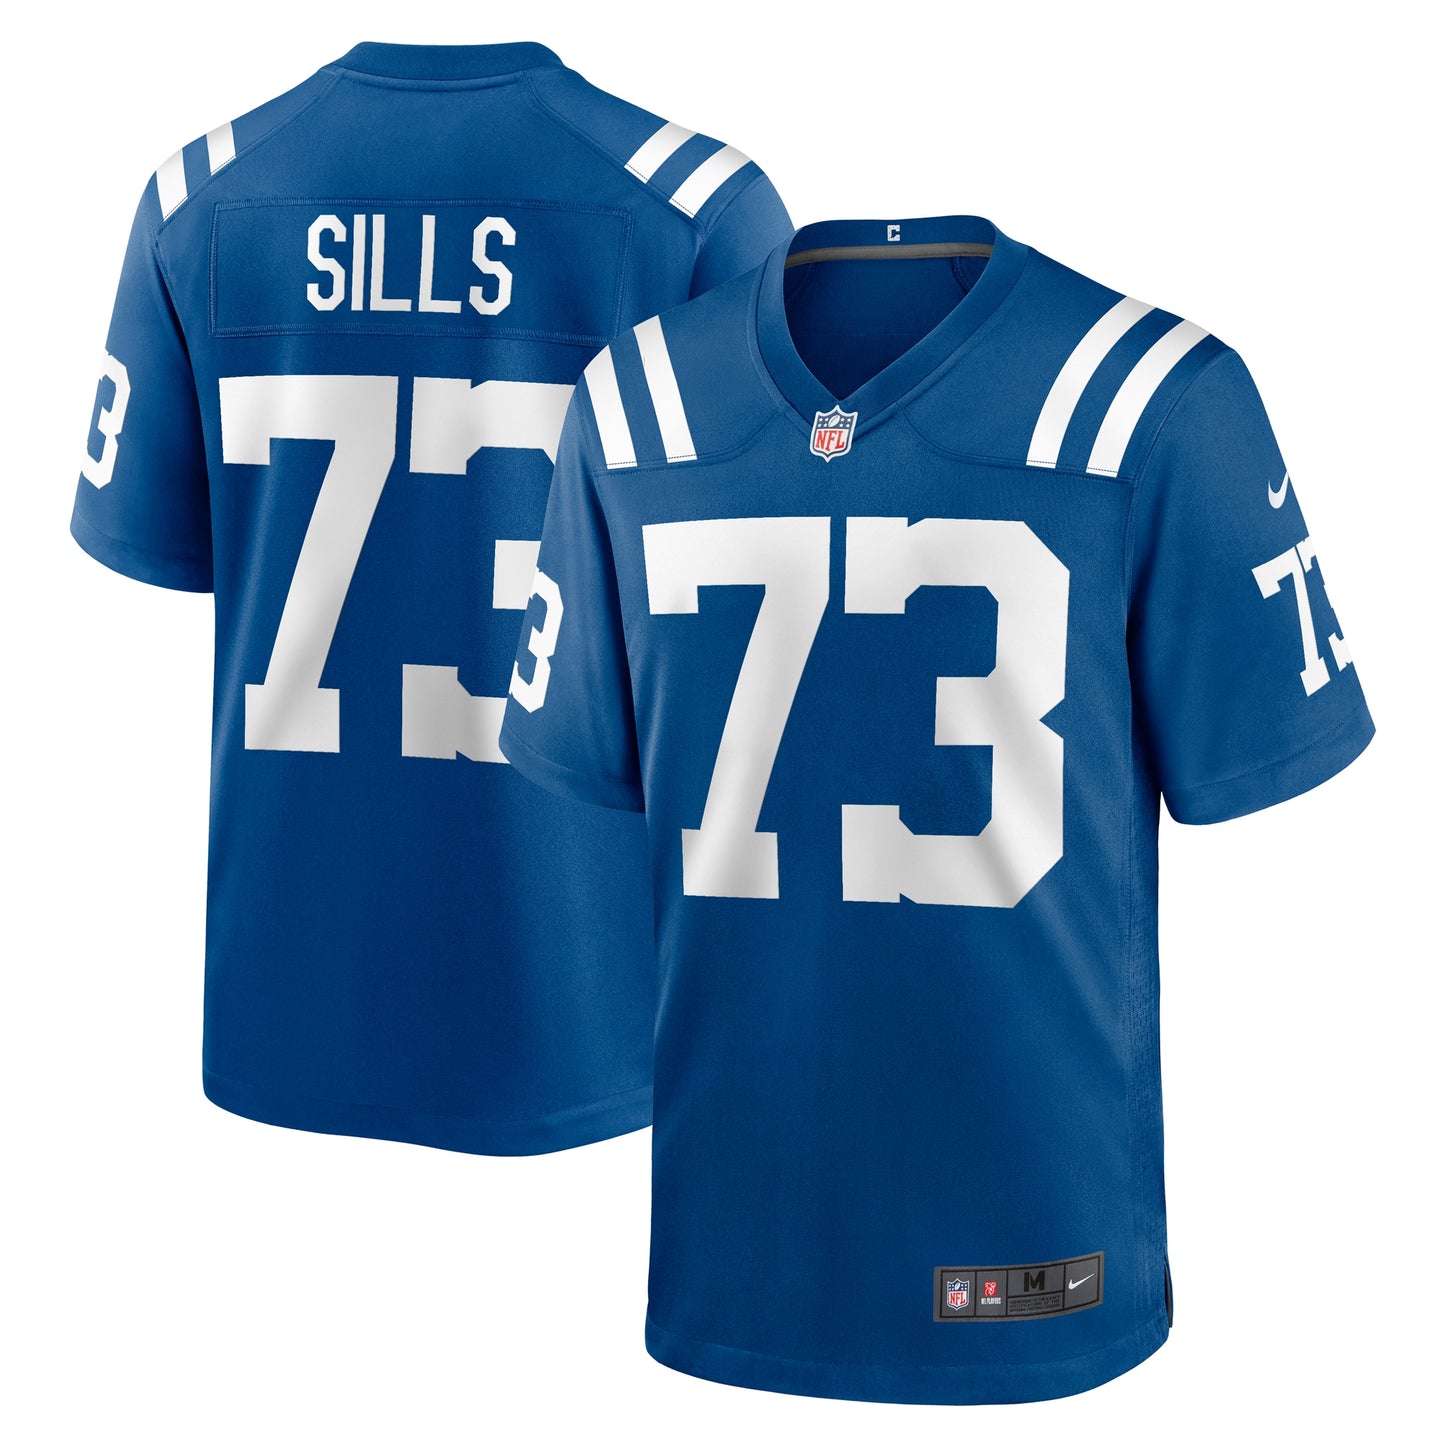 Josh Sills Indianapolis Colts Nike Team Game Jersey - Royal